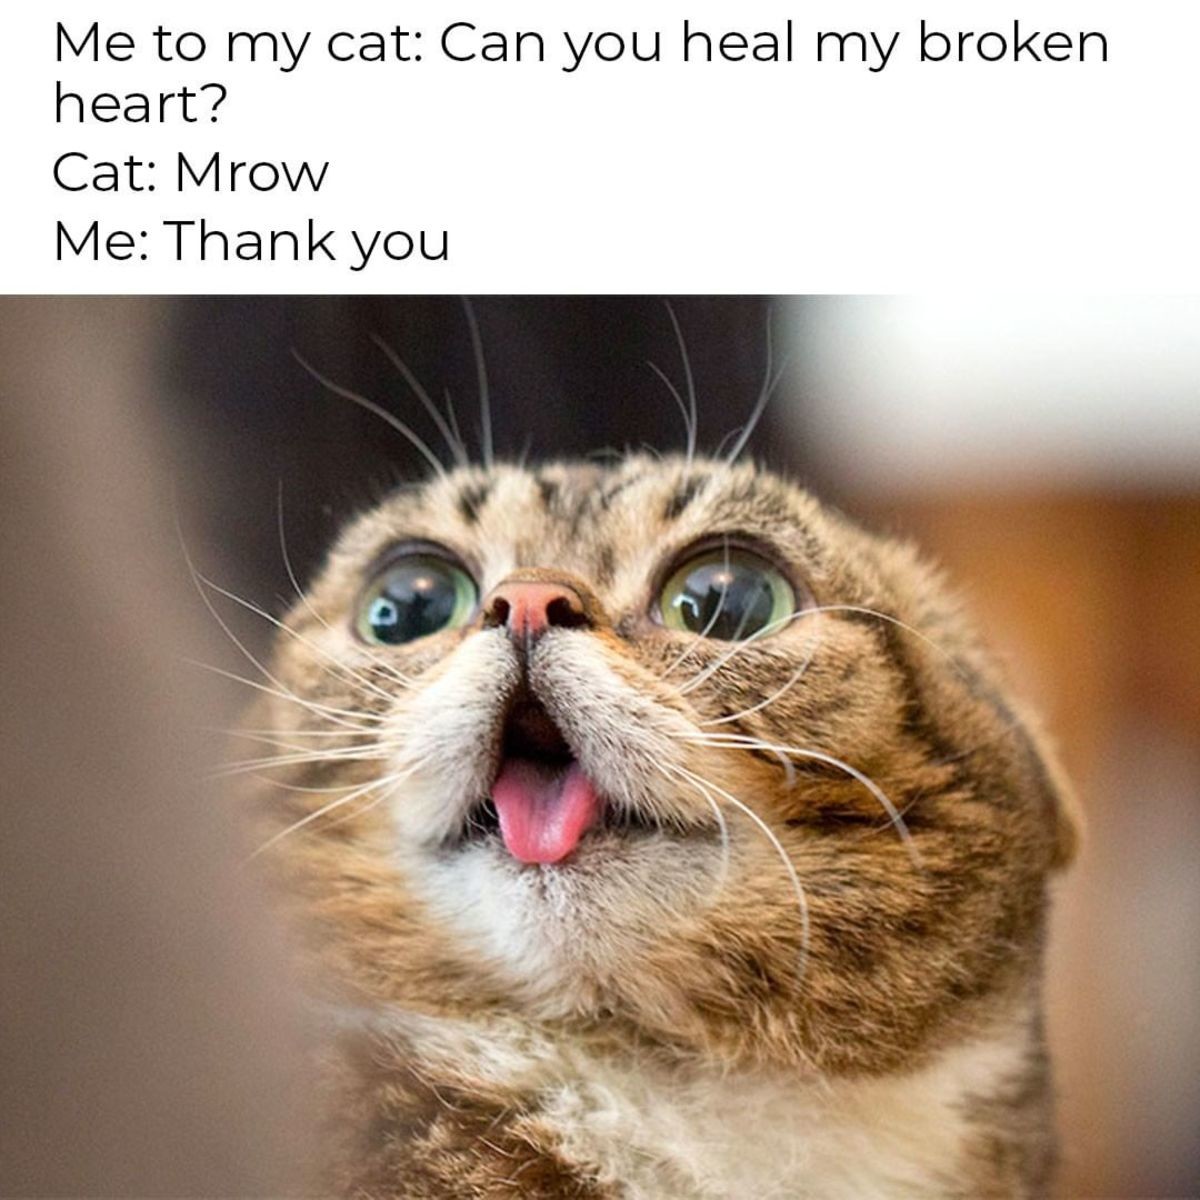 Healer. .. man, I don't much care for meme cats, but I still cried when I heard Bub died.